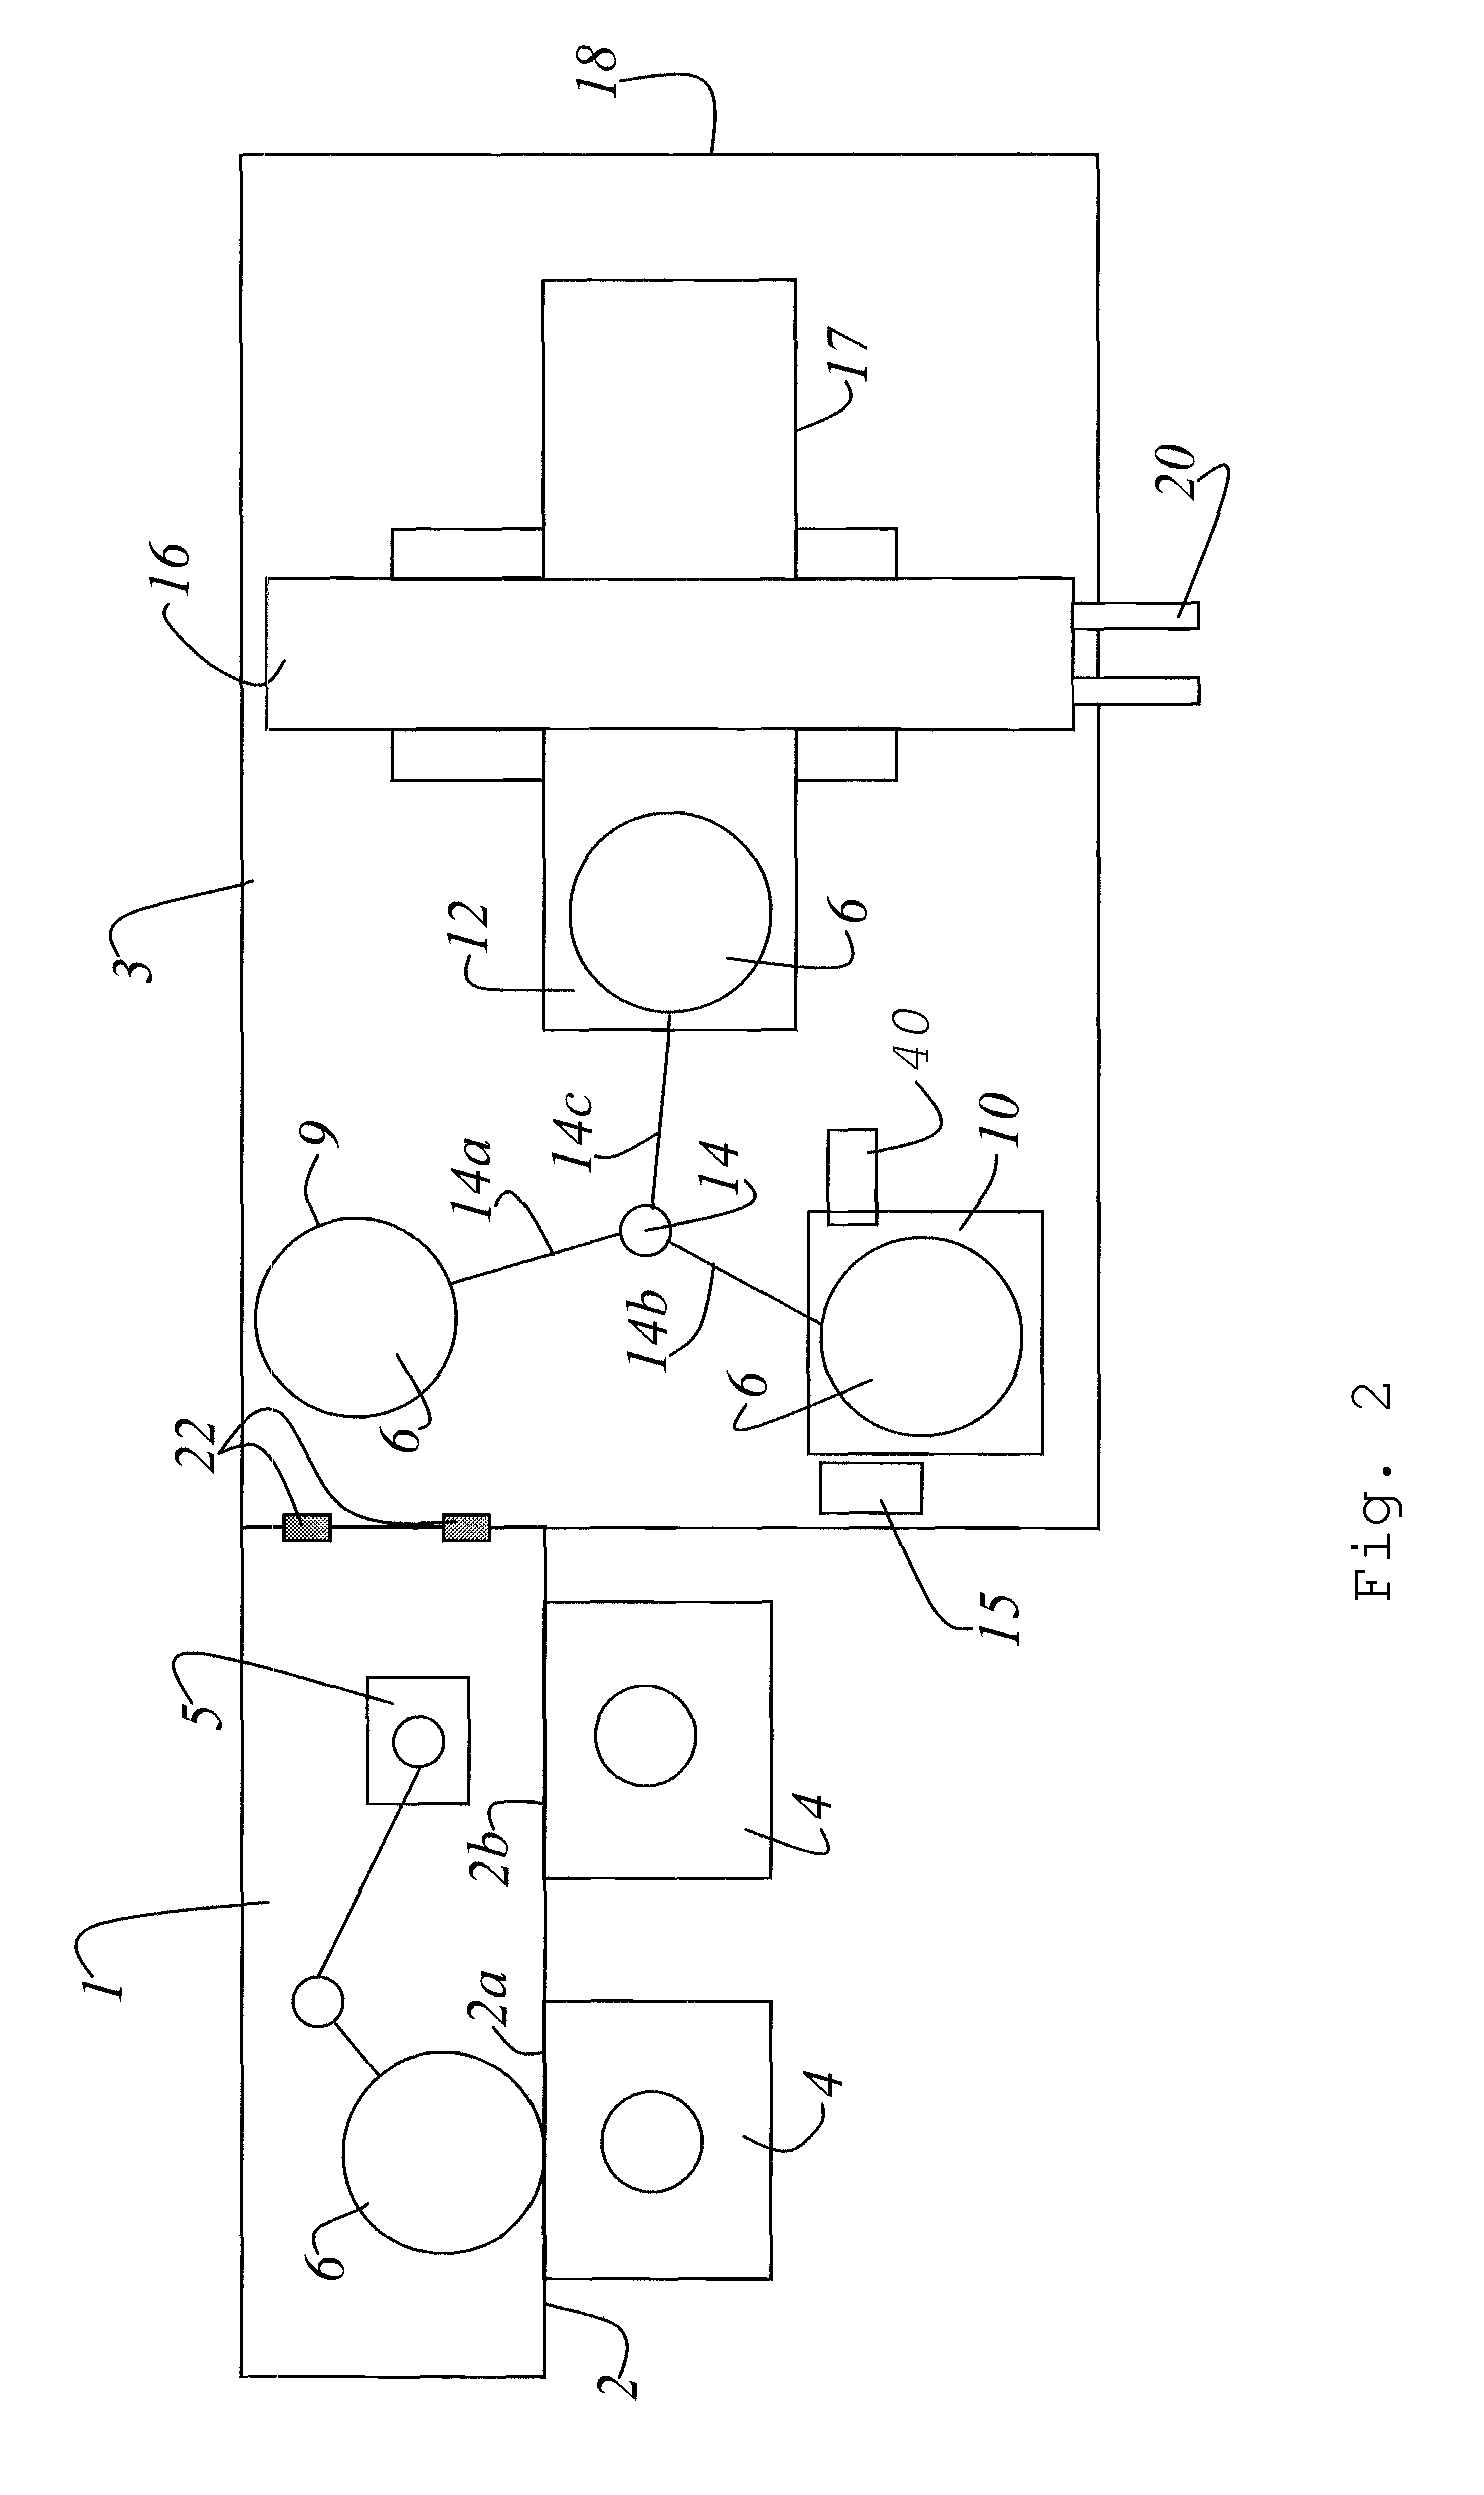 Device and method for the inspection of defects on the edge region of a wafer